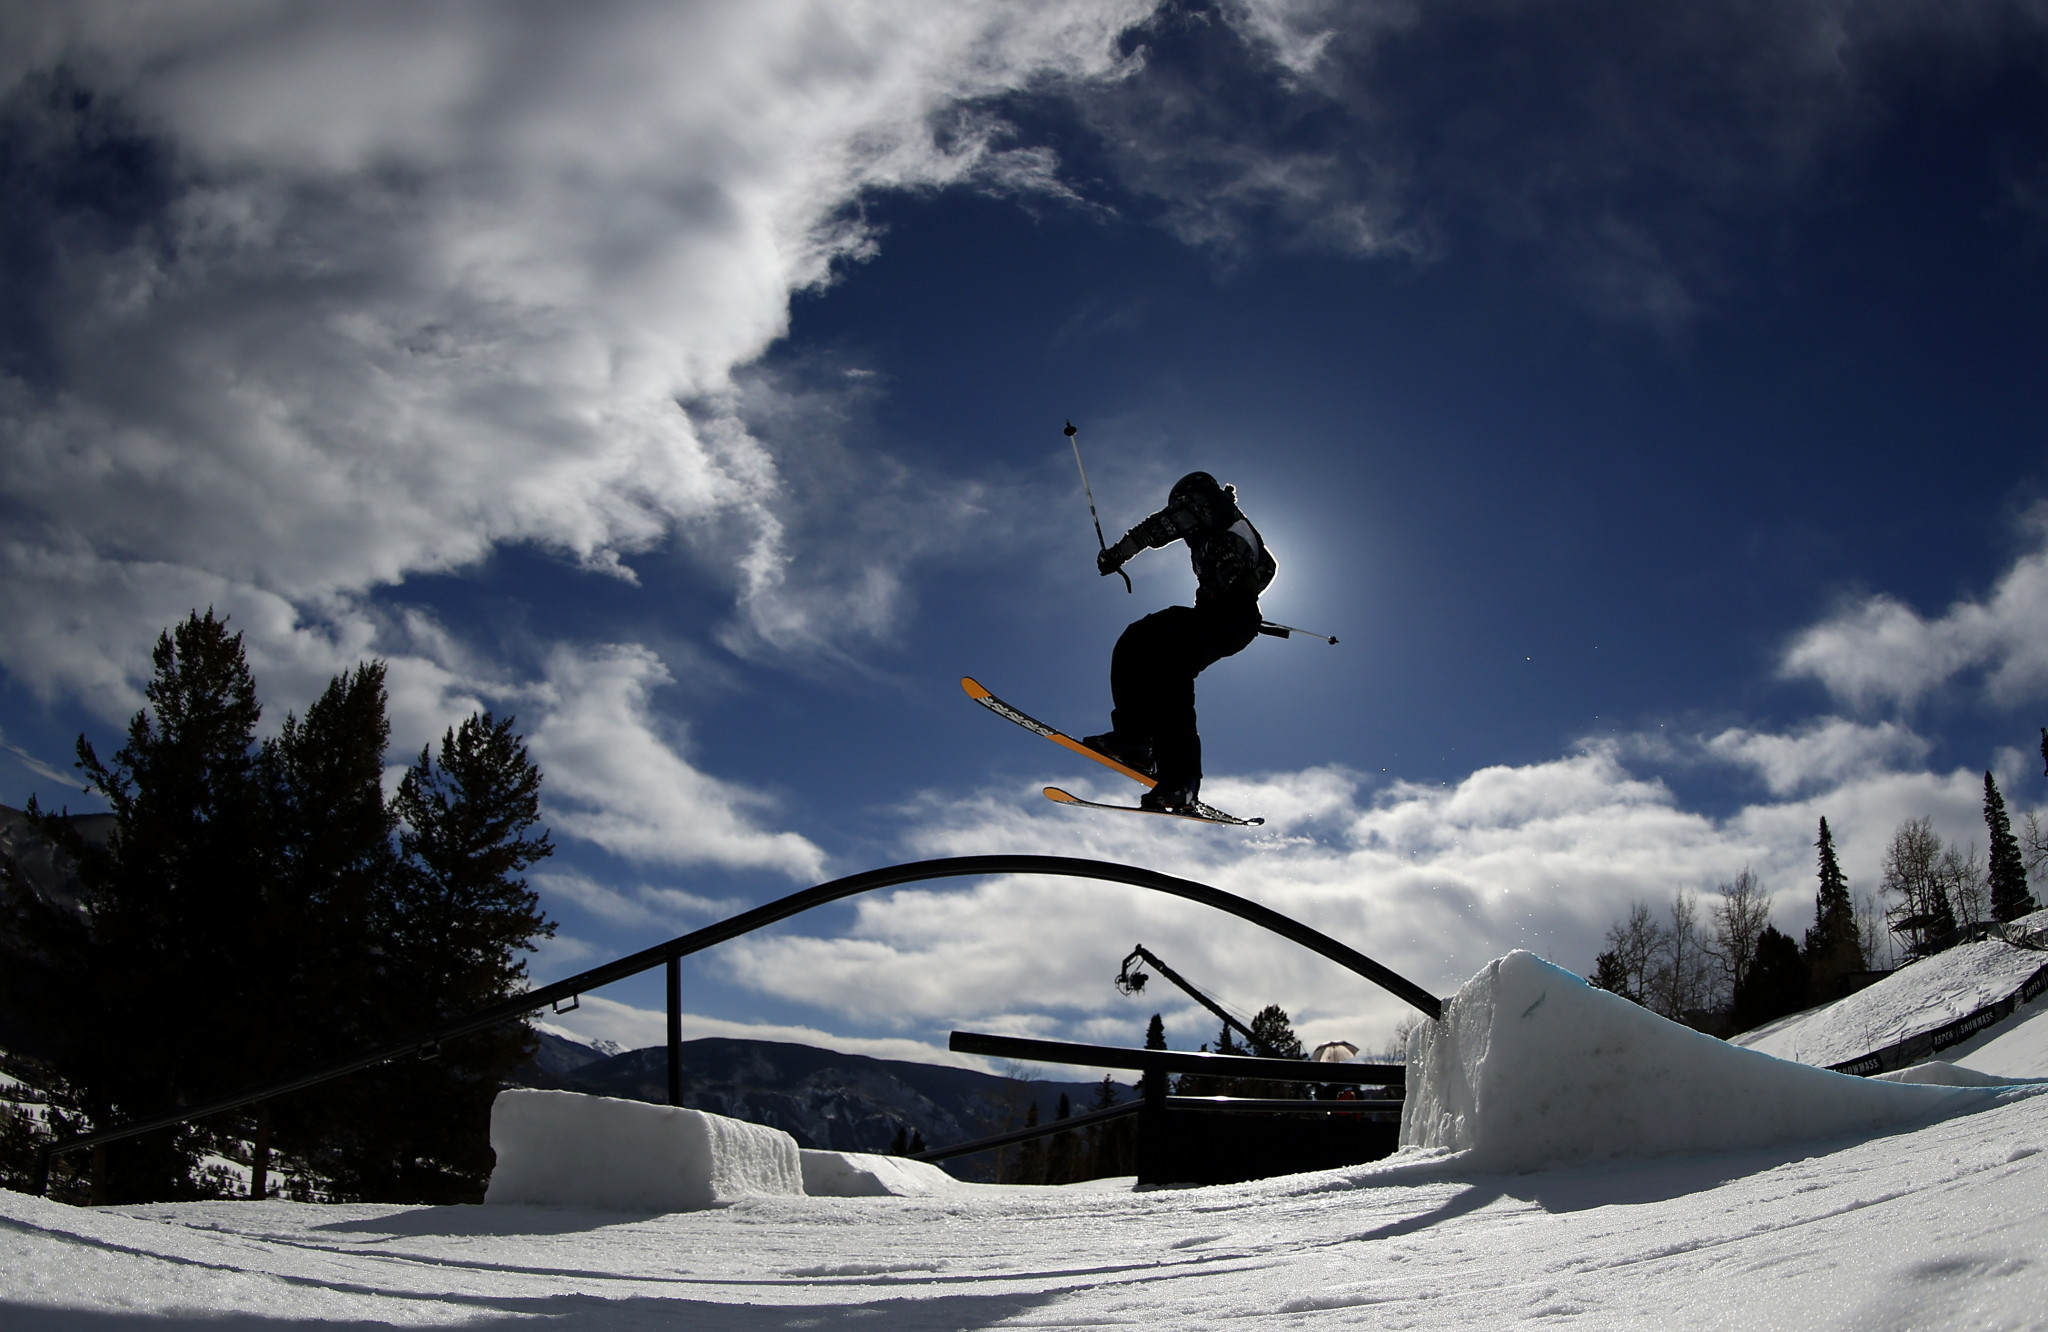 MSP Sports Capital is set to organise its first X Games in Aspen in January 2023 ©Getty Images